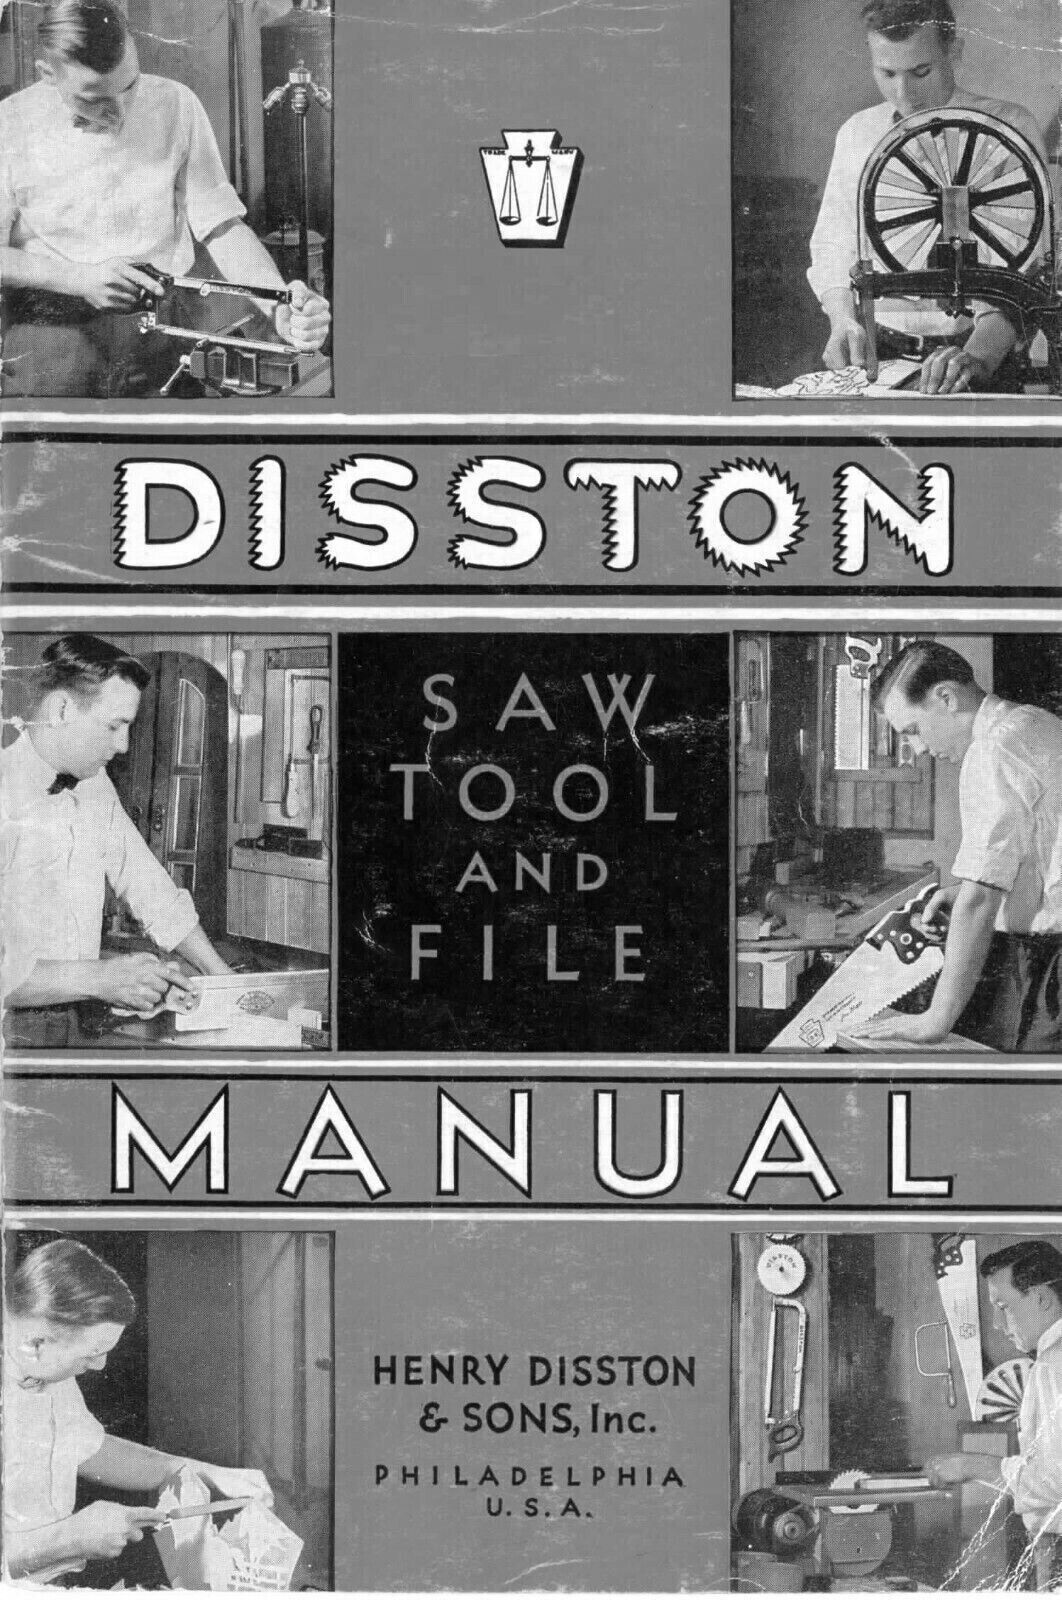 Tool and File Manual Fits Disston Saw, 1936